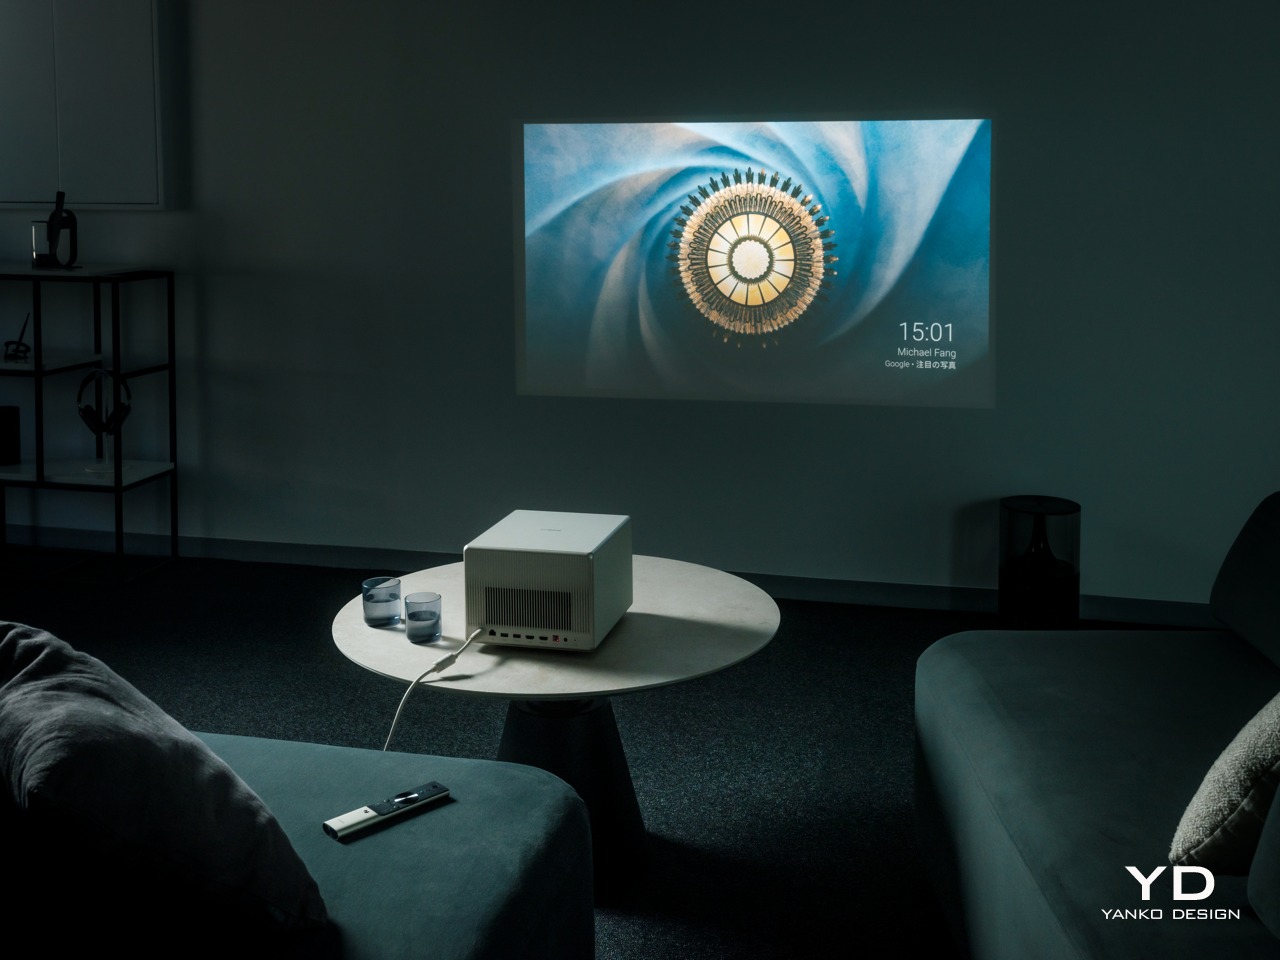 XGIMI Horizon Ultra review: A truly outstanding 4K projector with Dolby  Vision